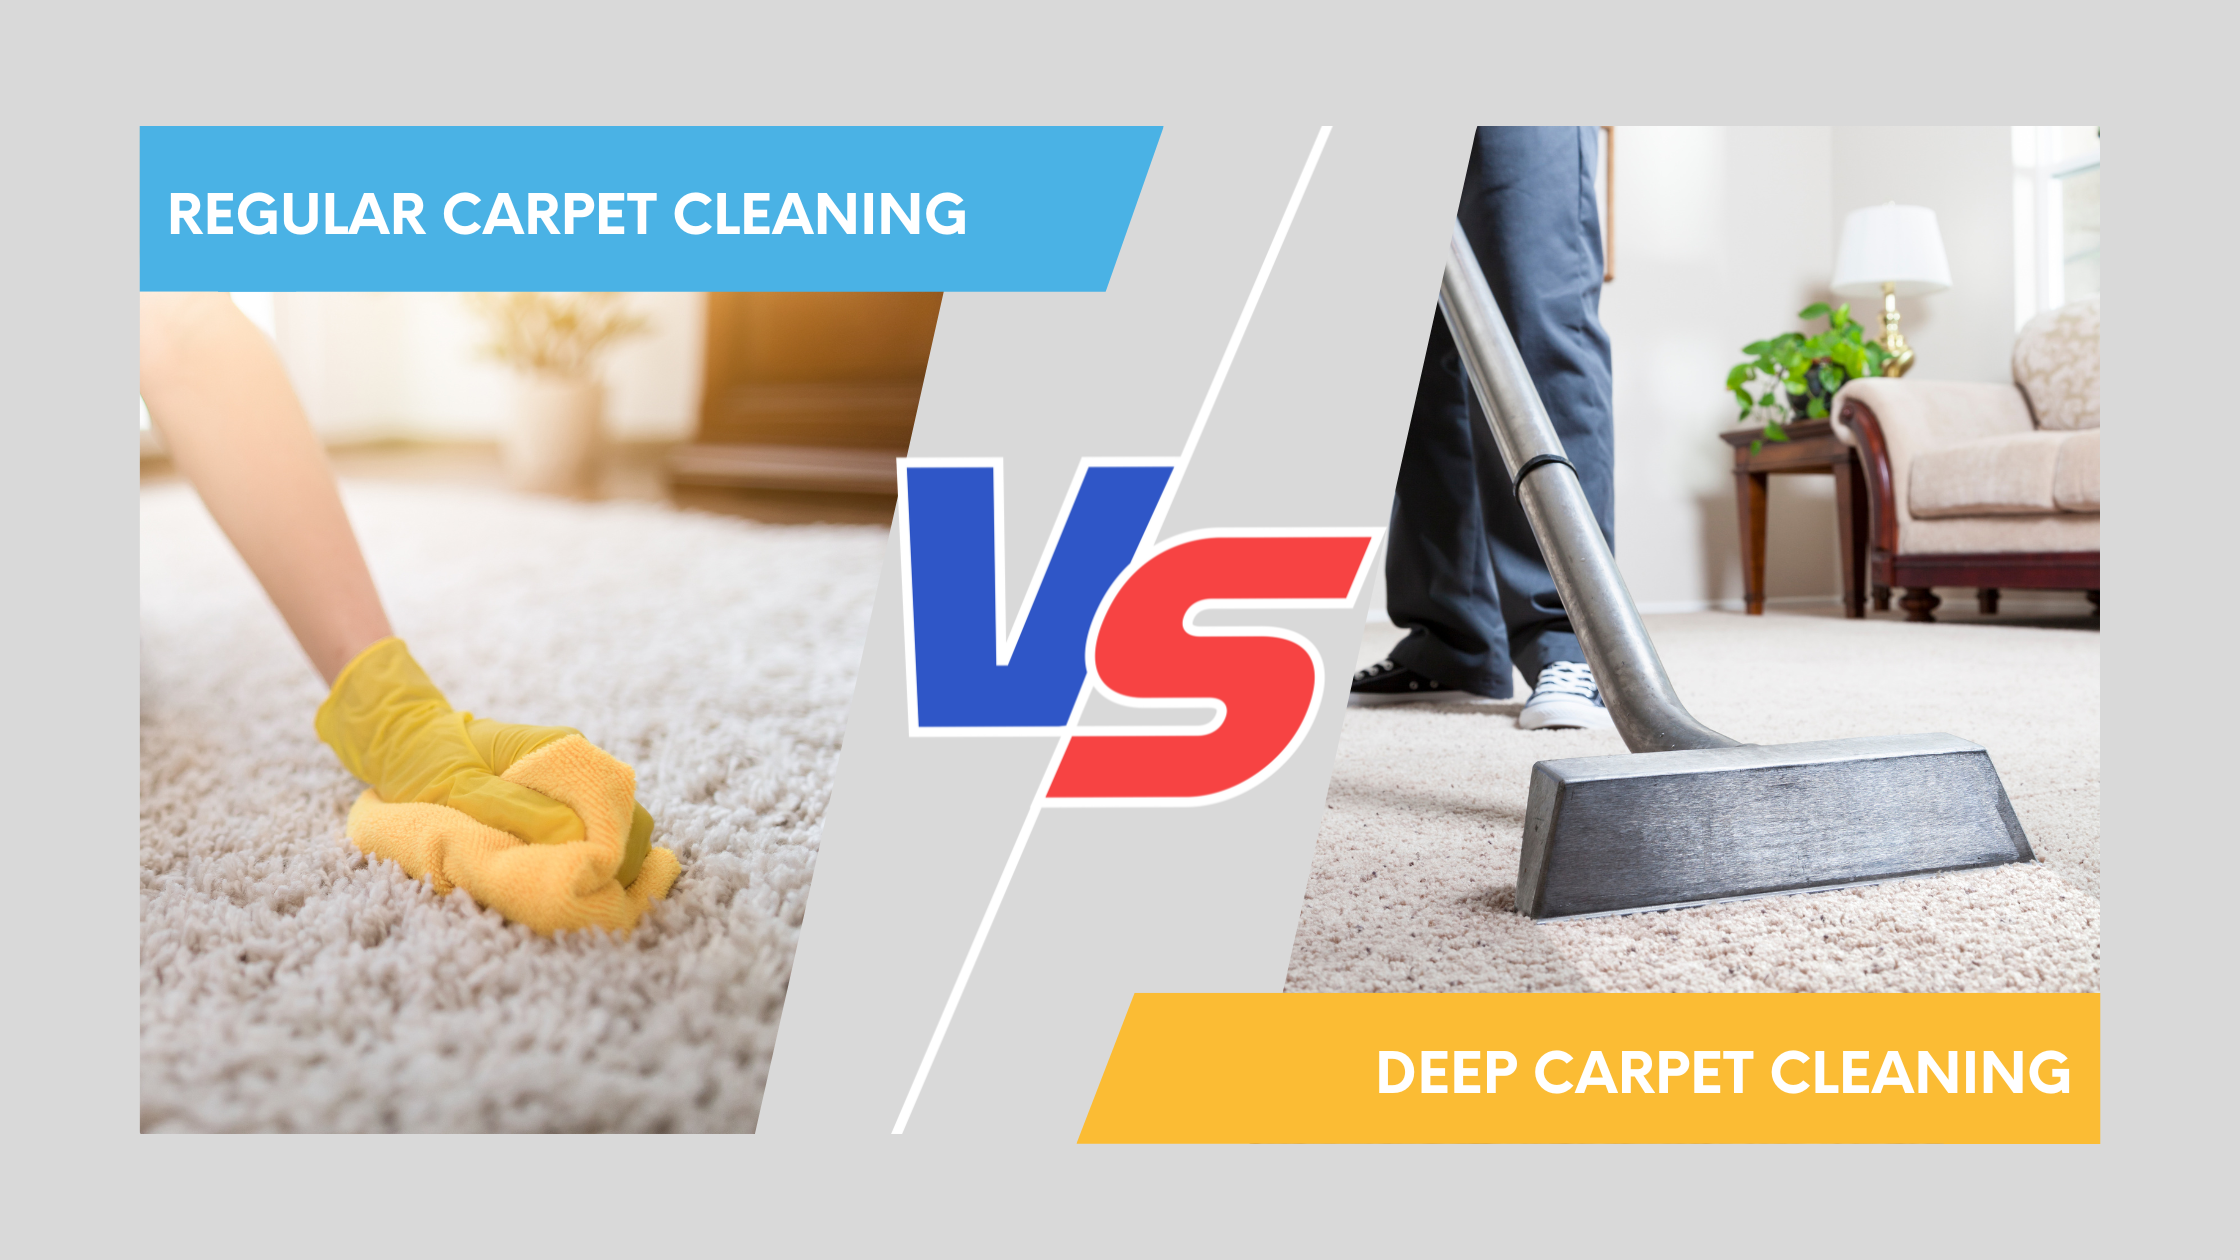 Regular cleaning vs deep cleaning of carpets